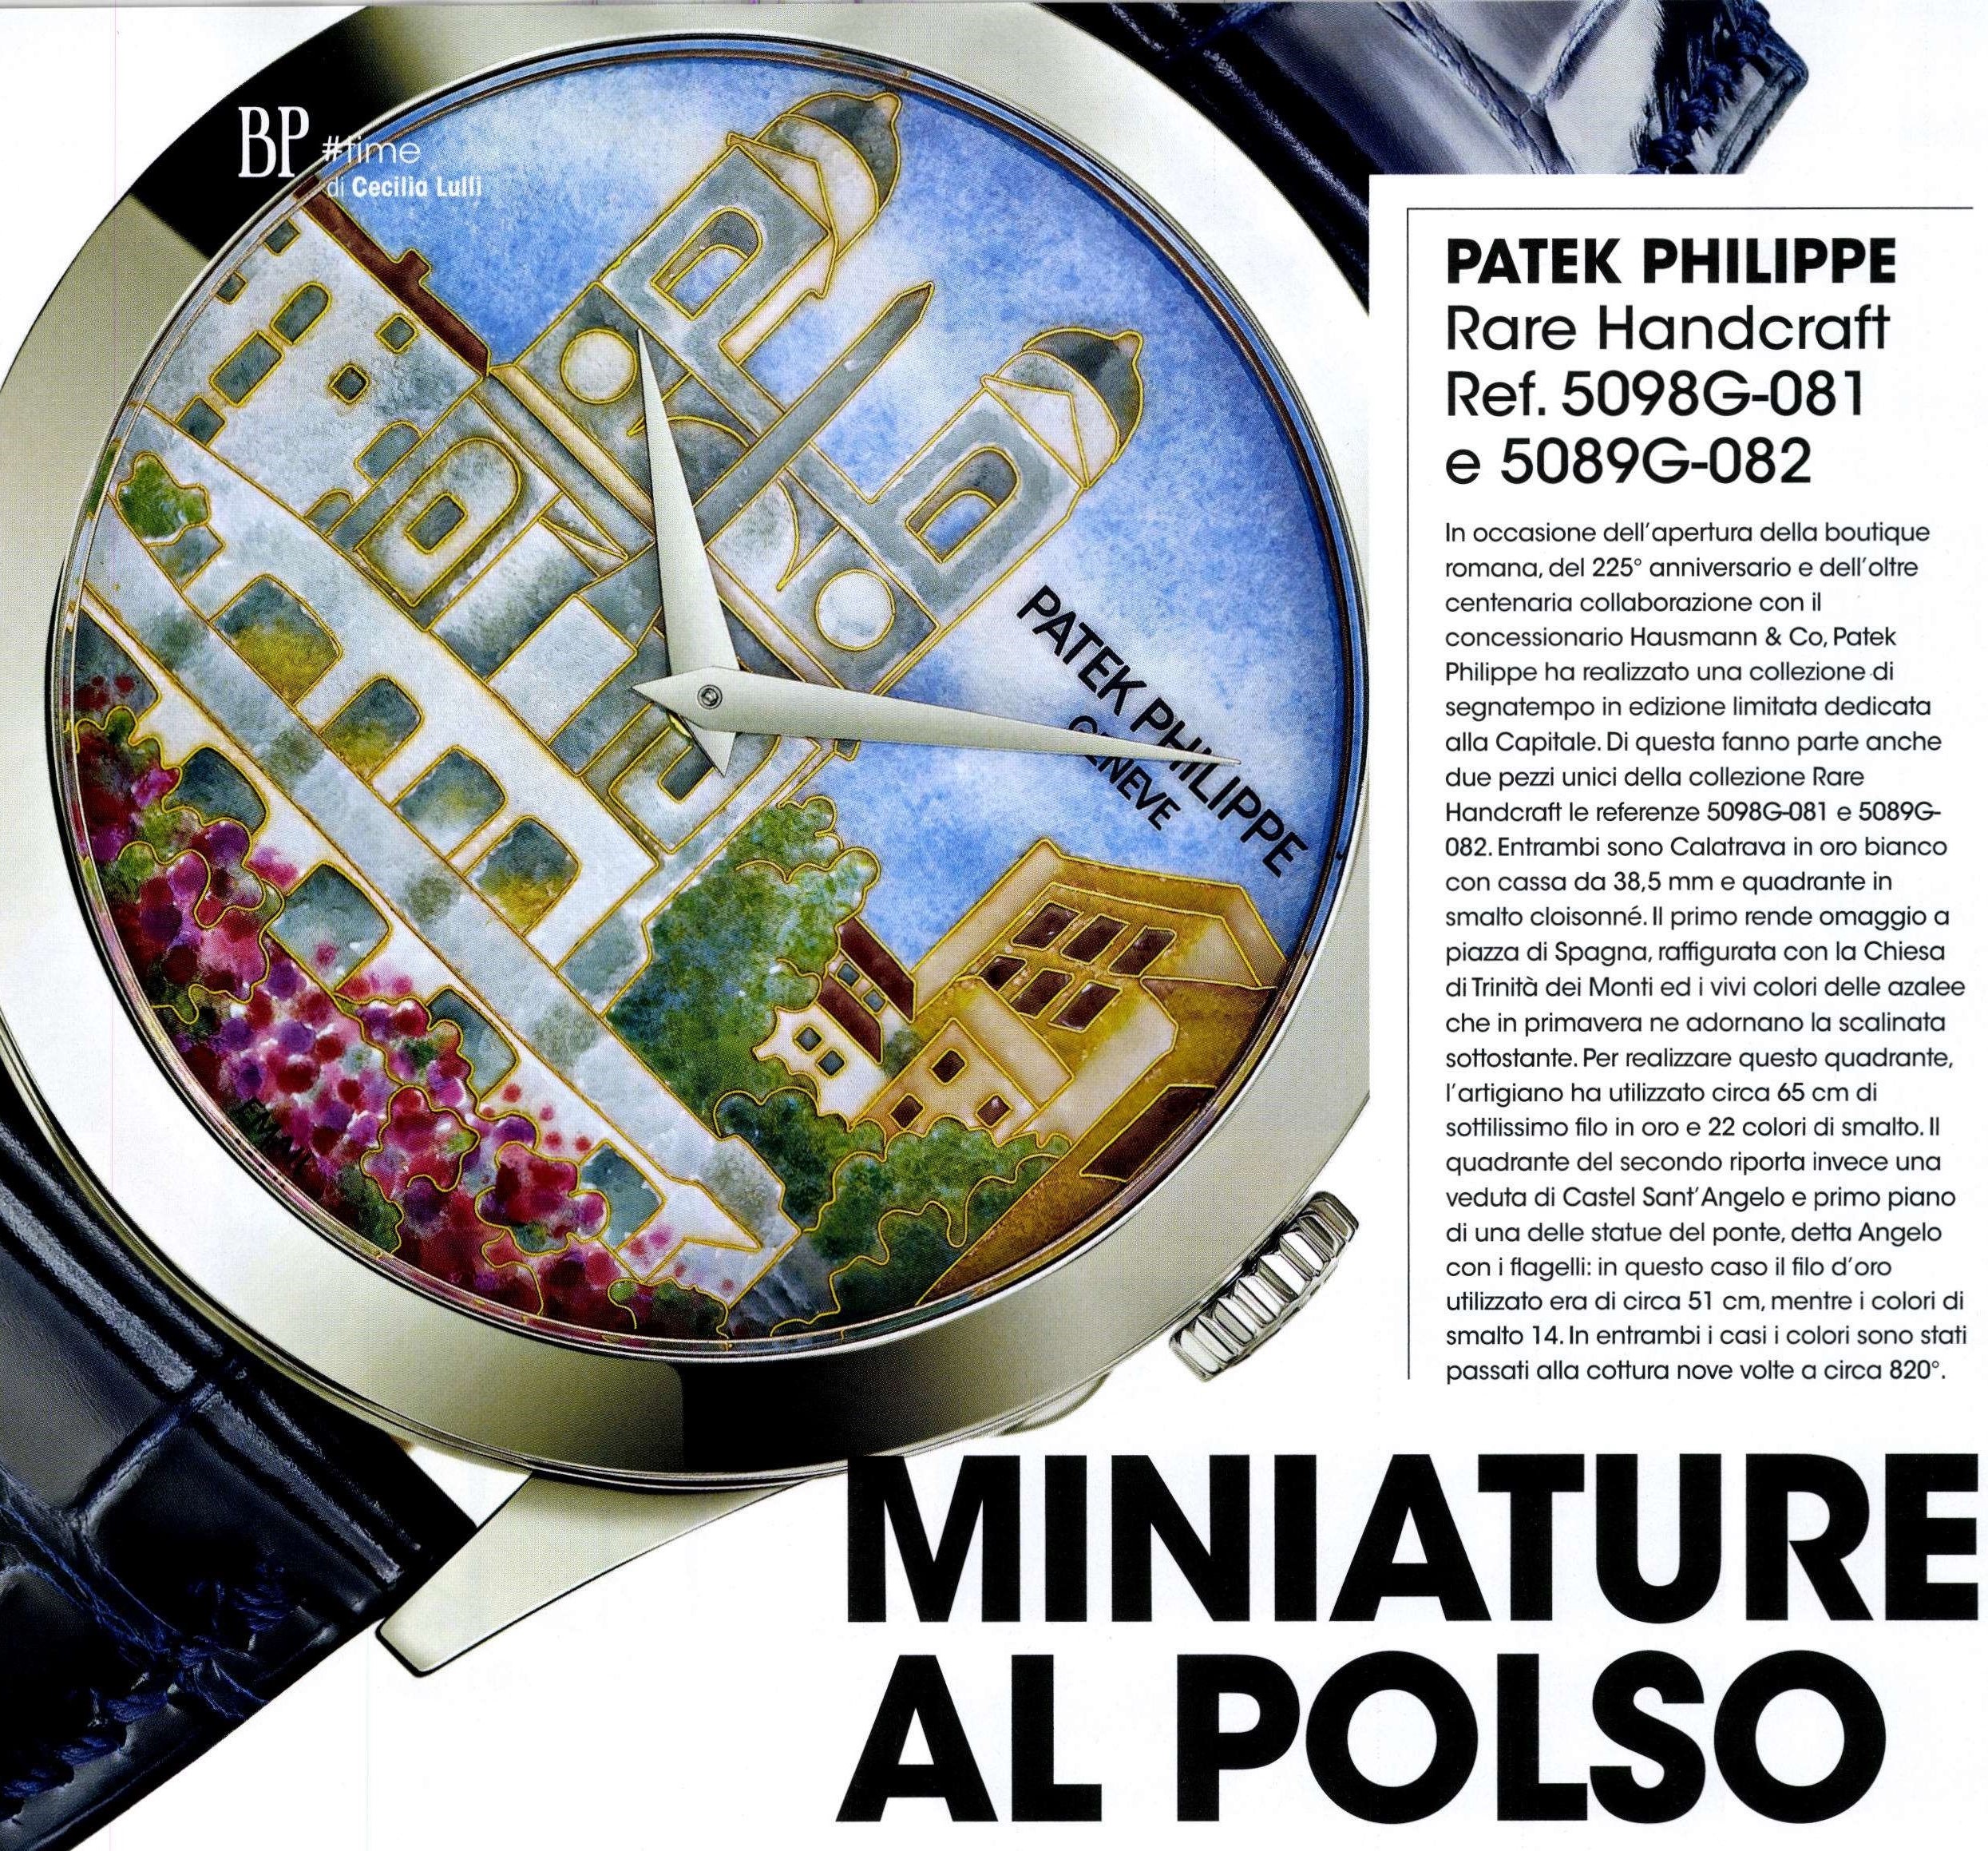 The new Patek Philippe Boutique and the collection dedicated to Rome in the spotlight